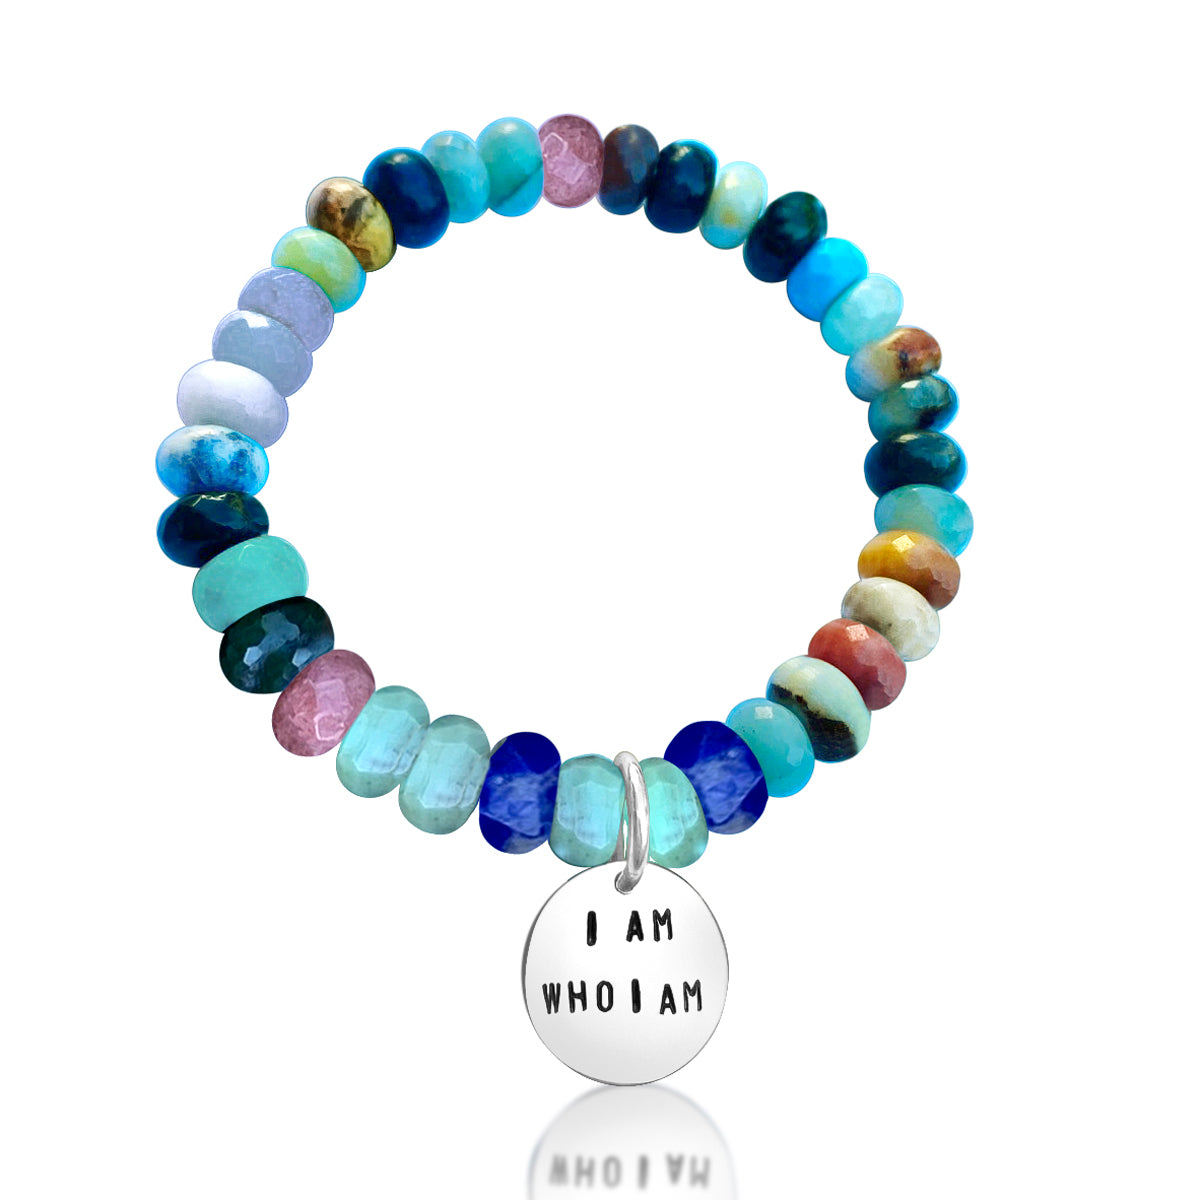 I am who I am Affirmation Bracelet. Mindfulness Bracelet with a Mix of Semi-Precious Chakra Healing Stones.  To be yourself in a world that is constantly trying to make you something else is the greatest accomplishment. 